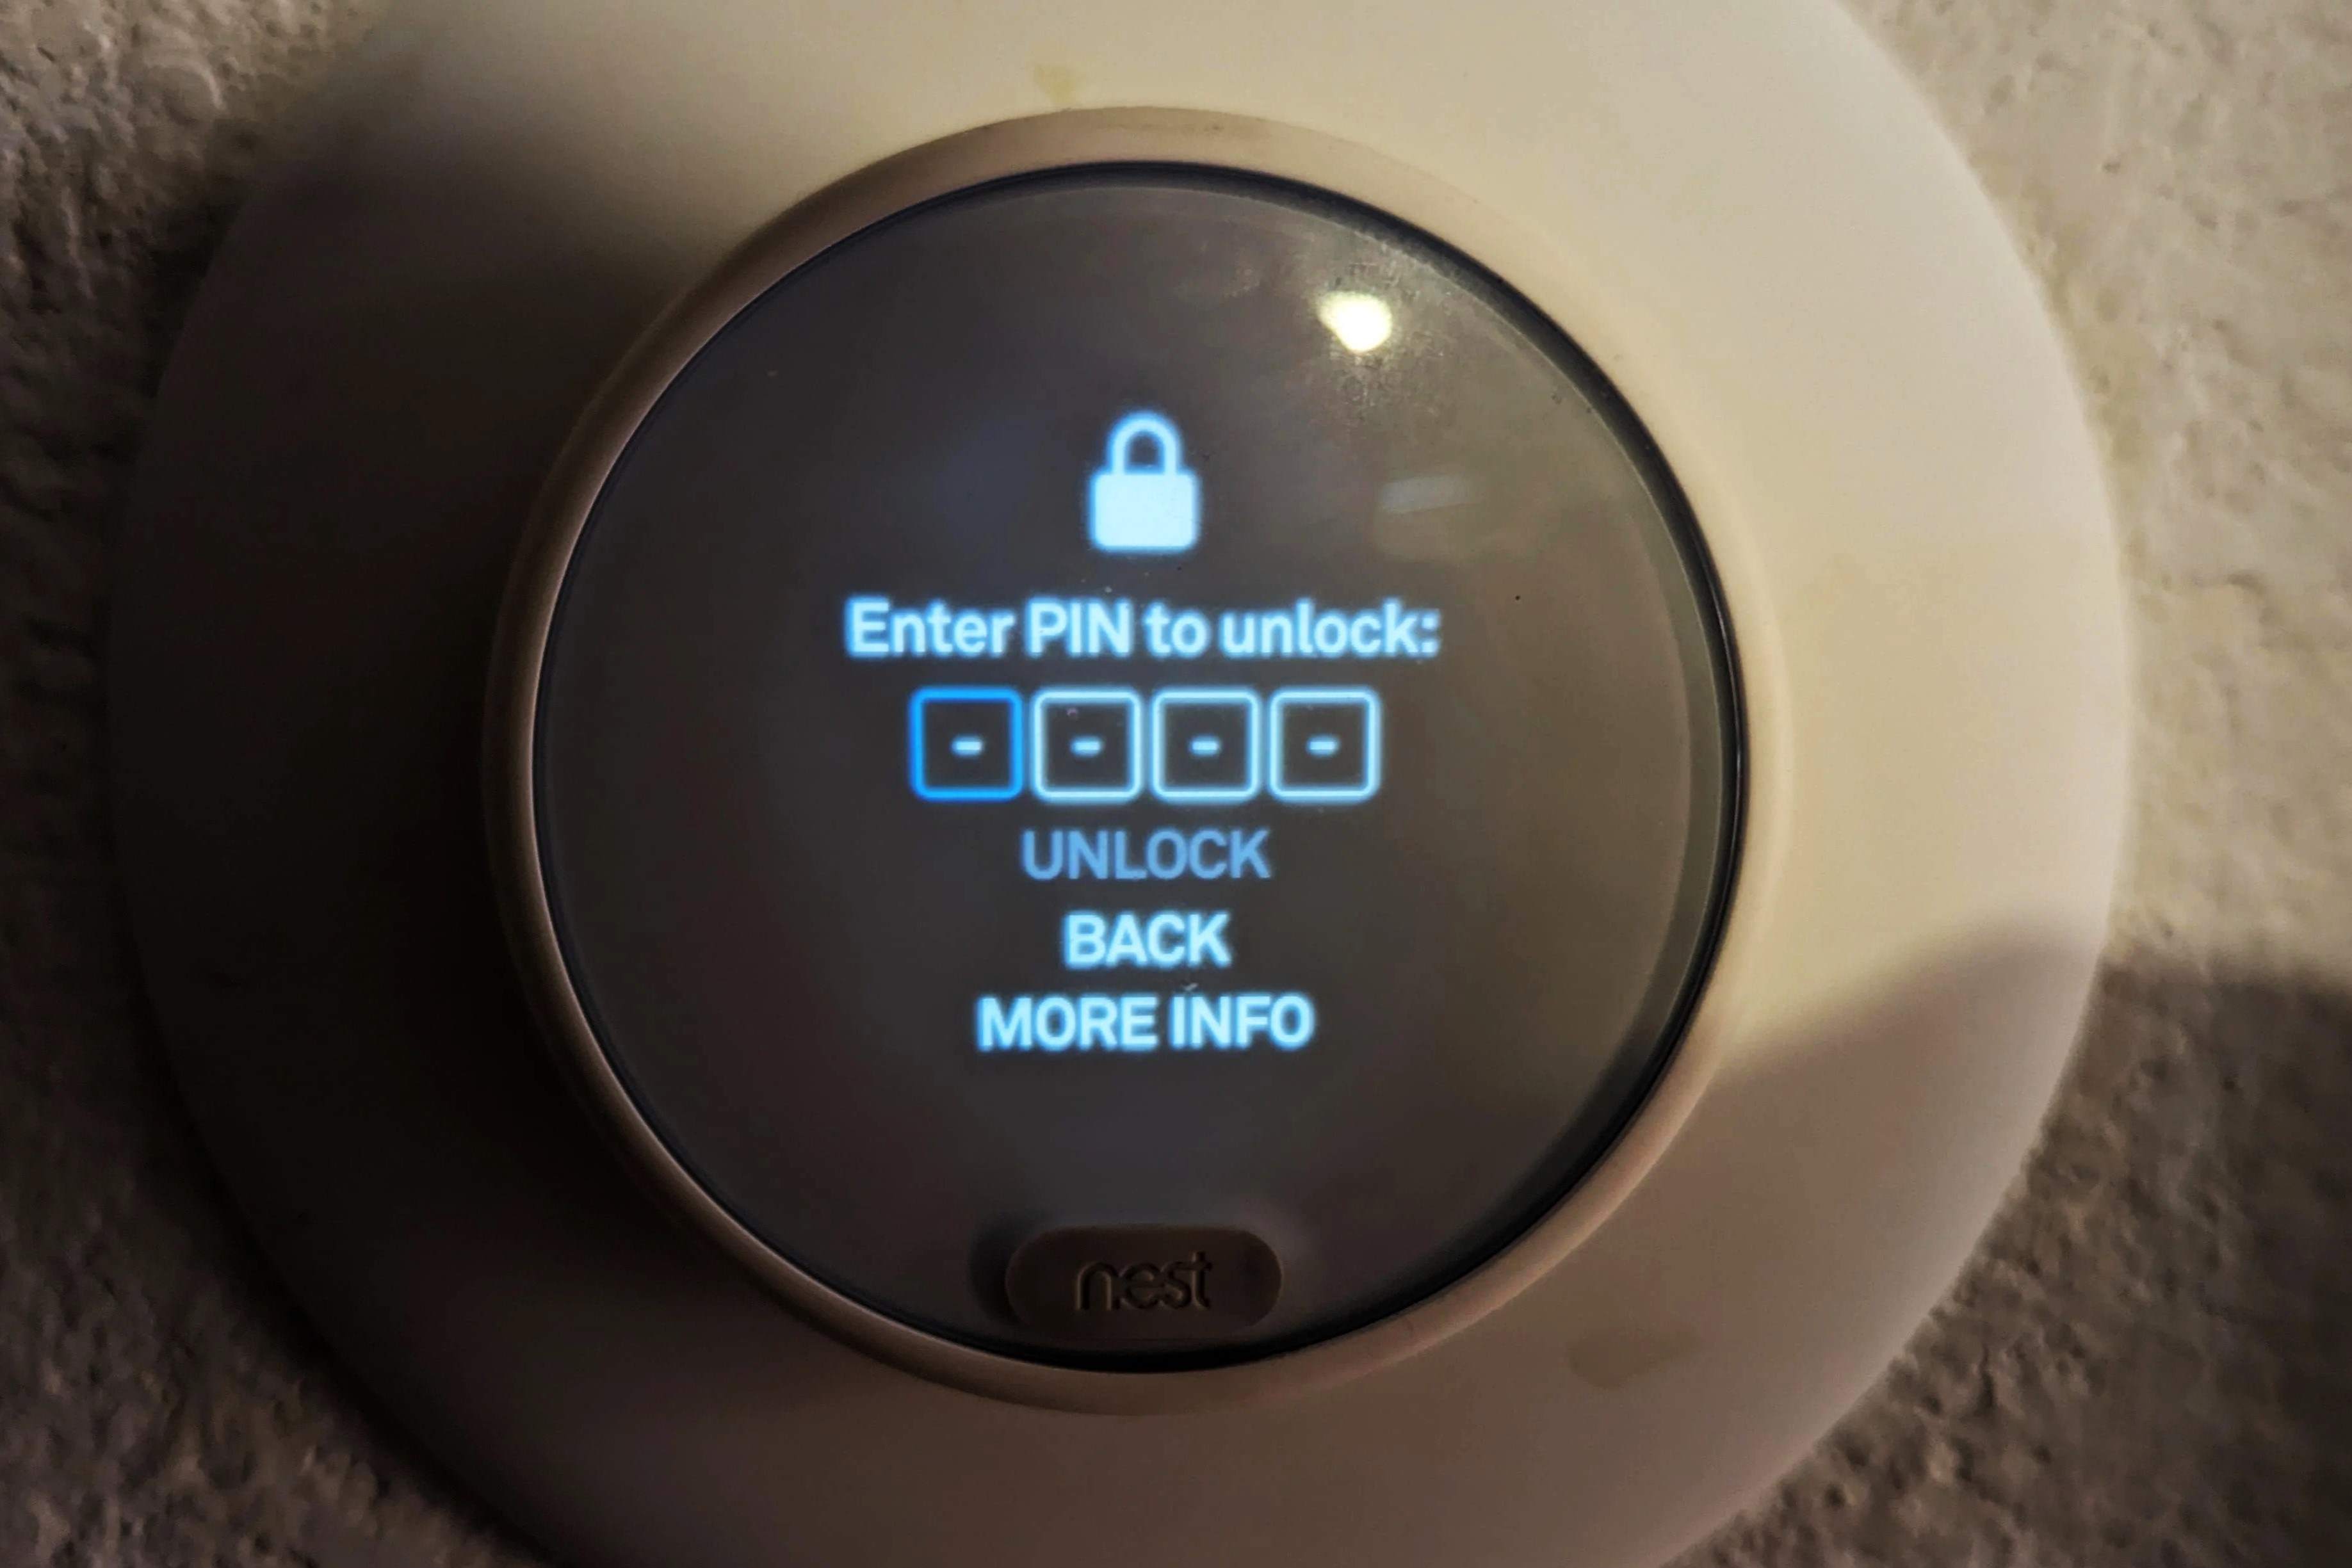 How To Unlock Nest Thermostat Without PIN Or App